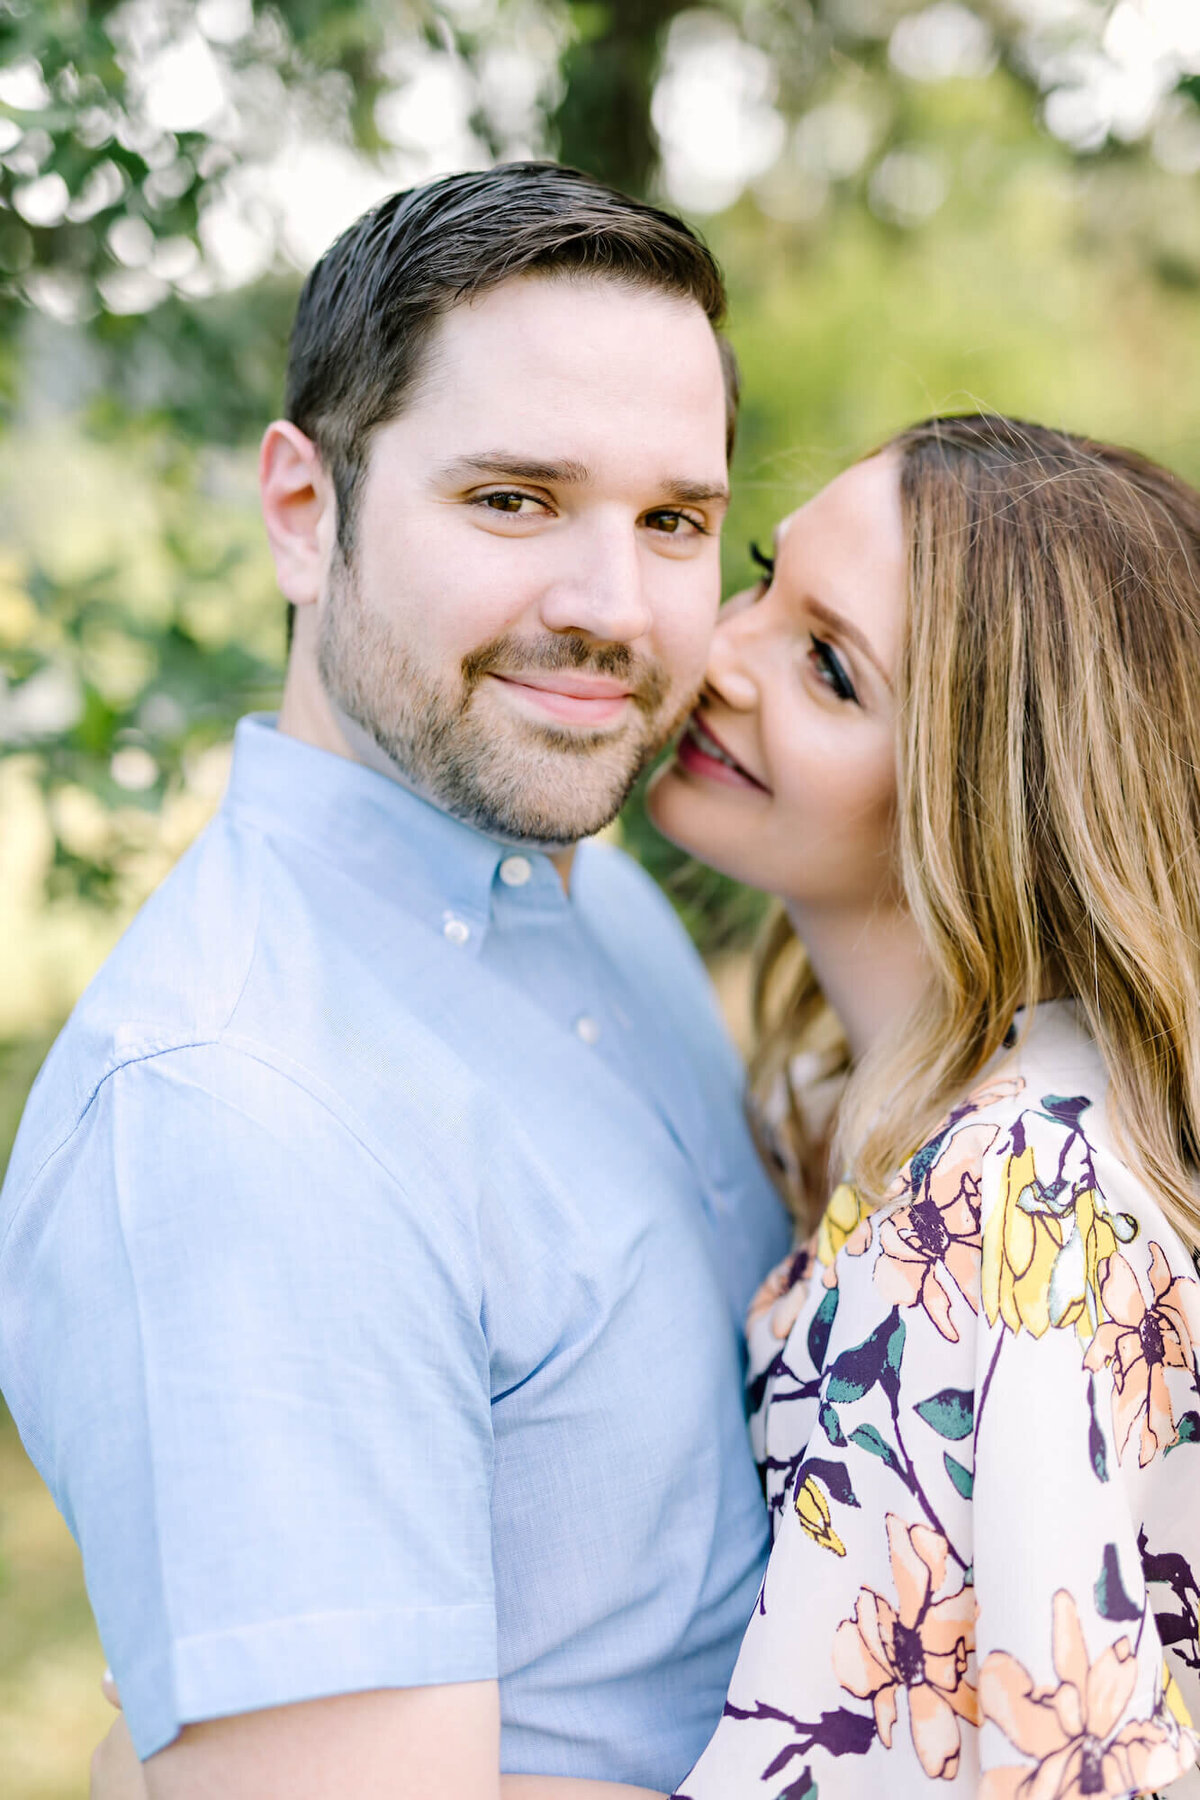 An outdoor engagement session in Austin, Texas